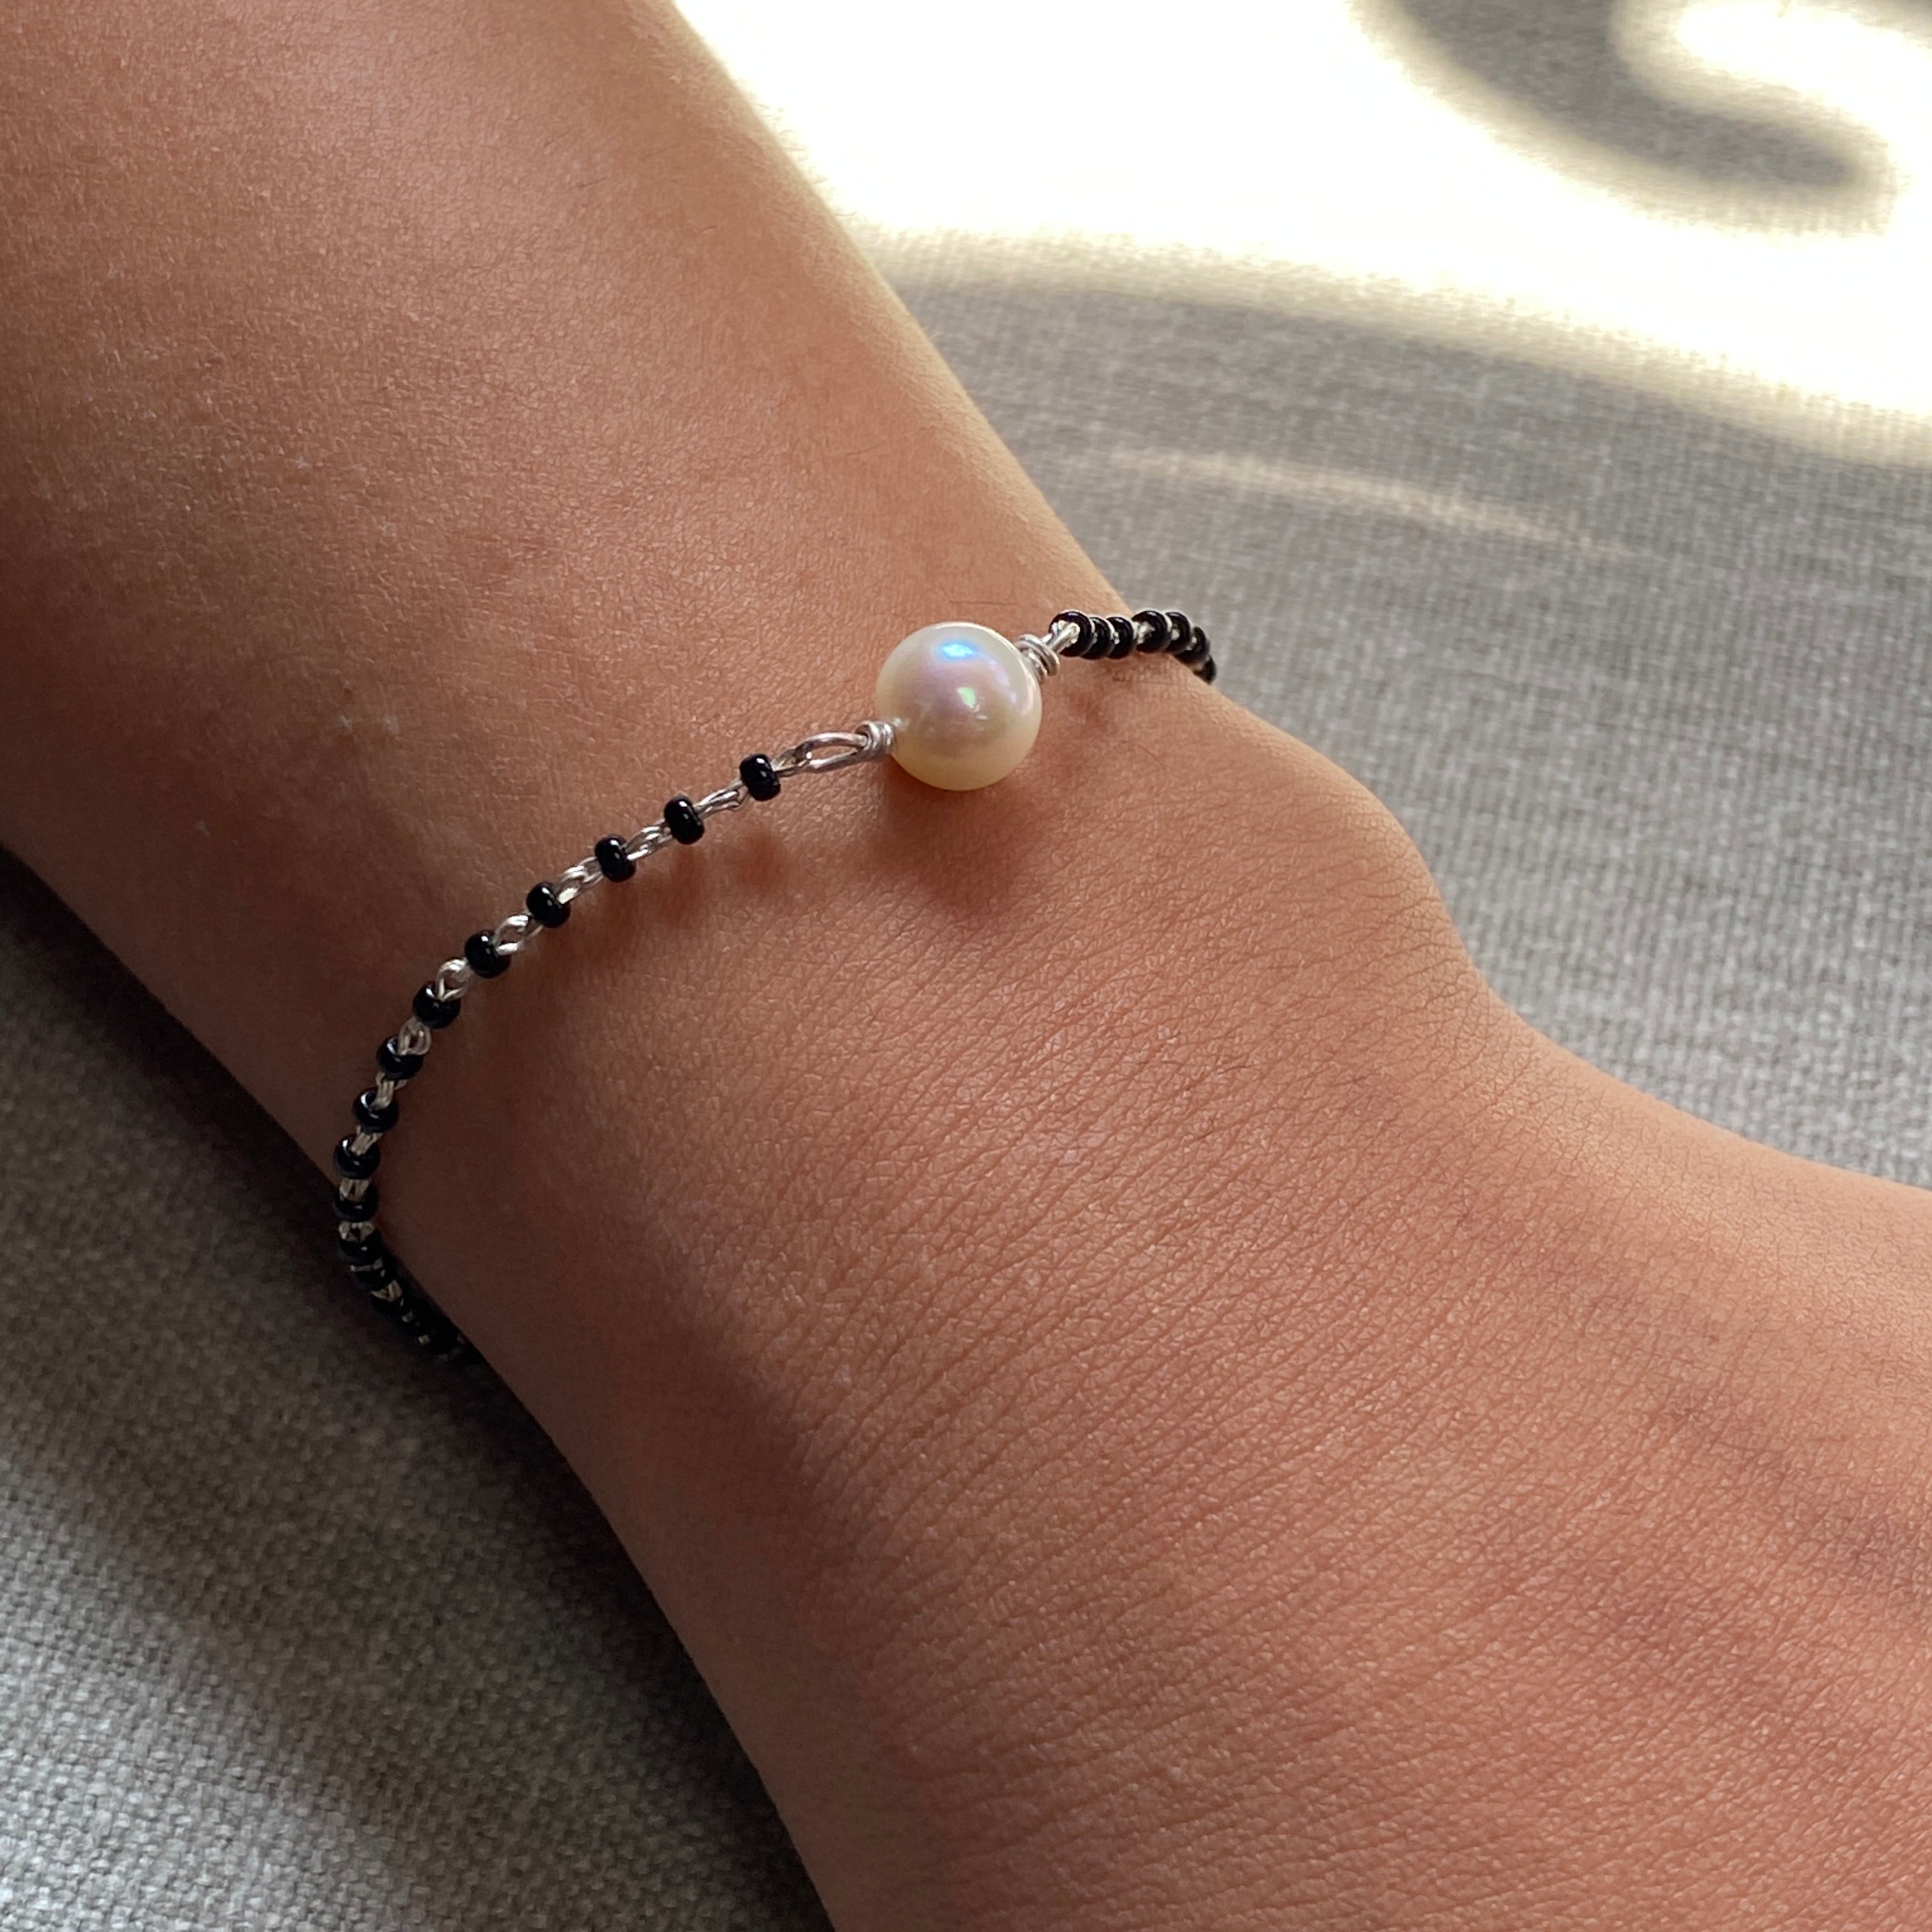 a person wearing a bracelet with a pearl on it